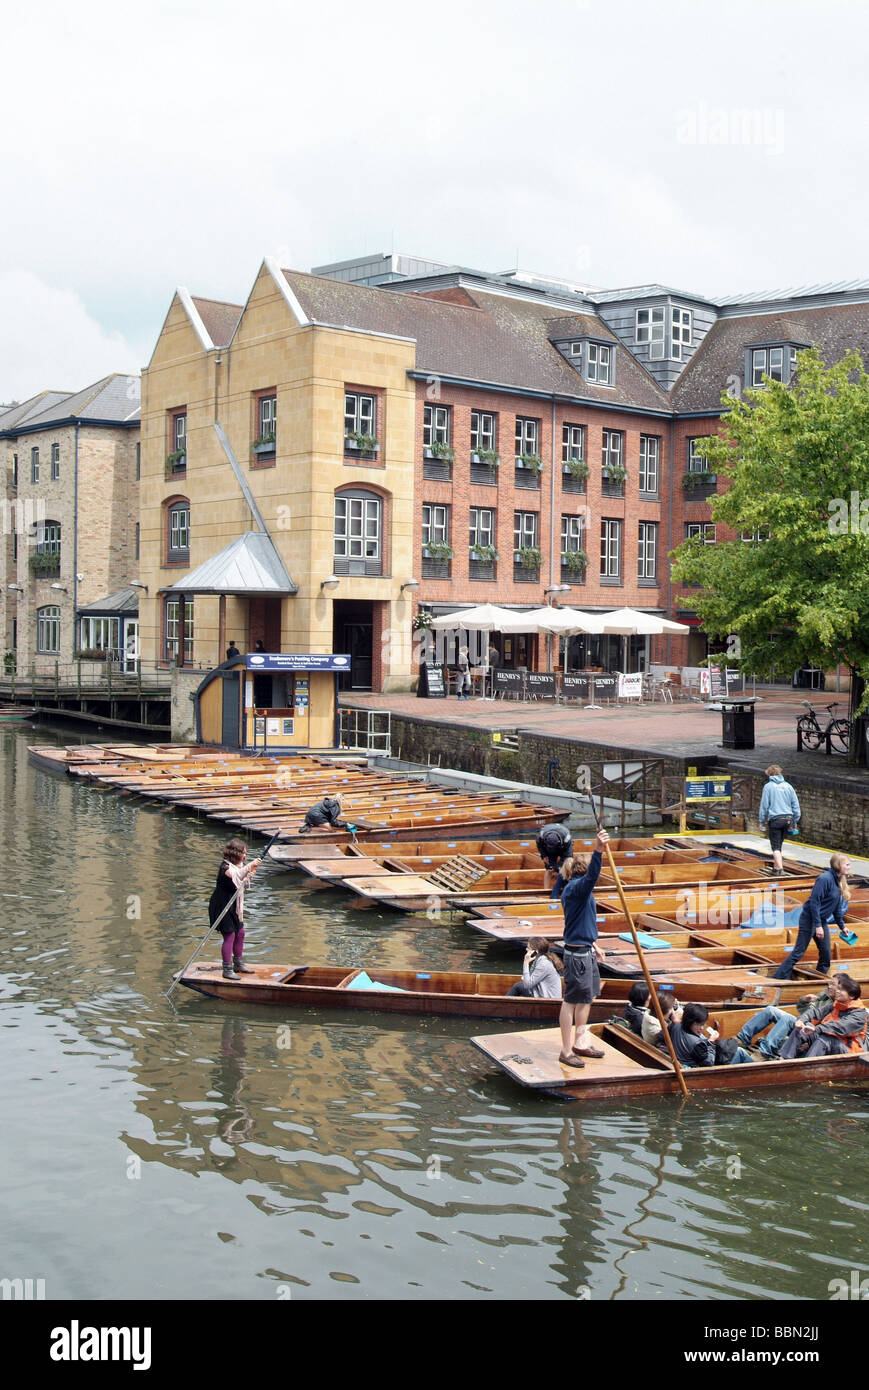 The quayside area of Cambridge with Scudamores punting yard, Cambridge England UK Stock Photo